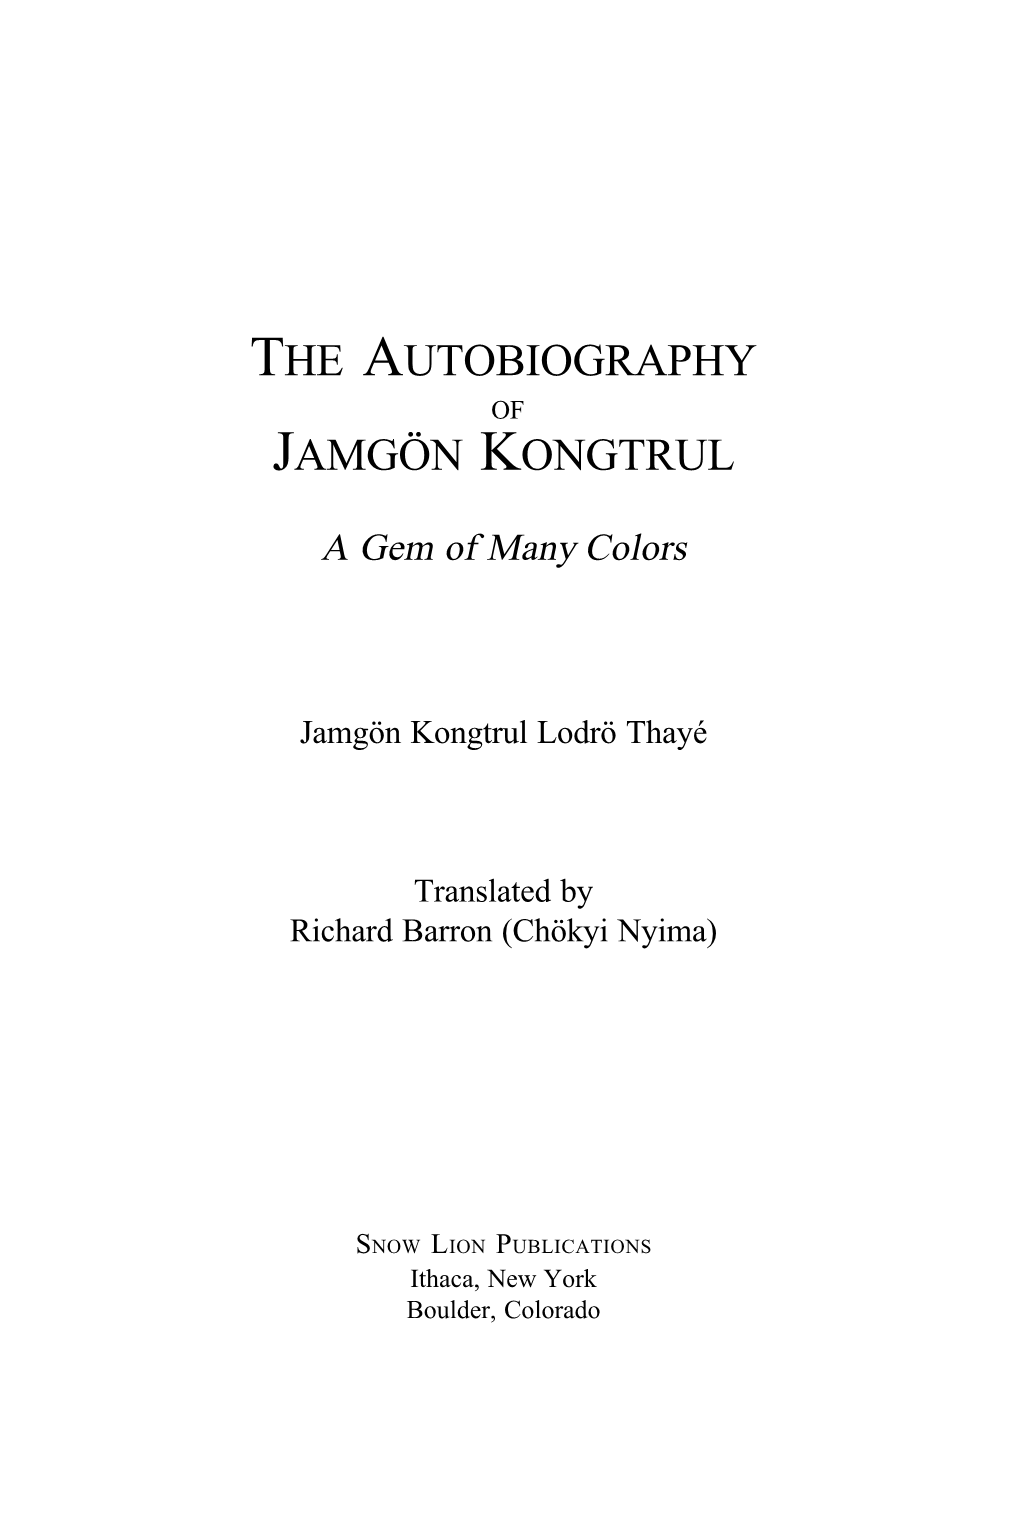 The Autobiography of Jamgon Kongtrul: a Gem of Many Colors